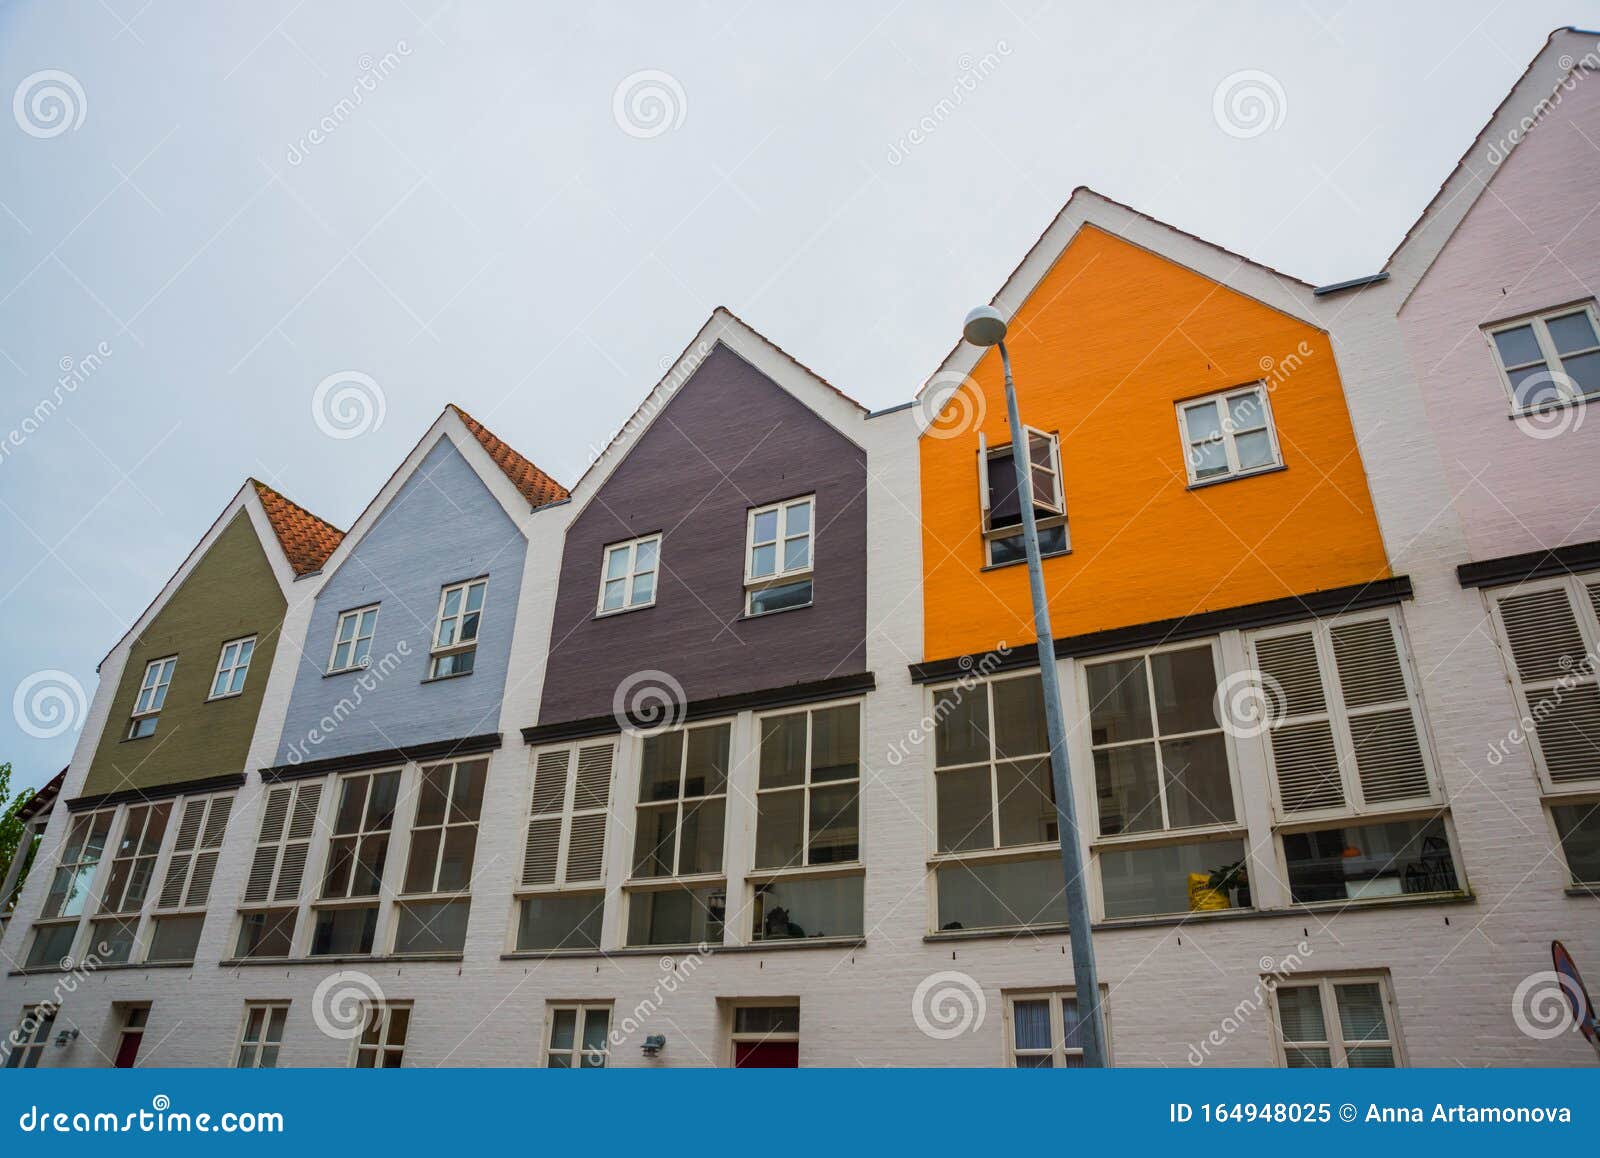 Odense Denmark Beautiful Multicolored Facades Of Buildings Editorial Image Image Of Beautiful History